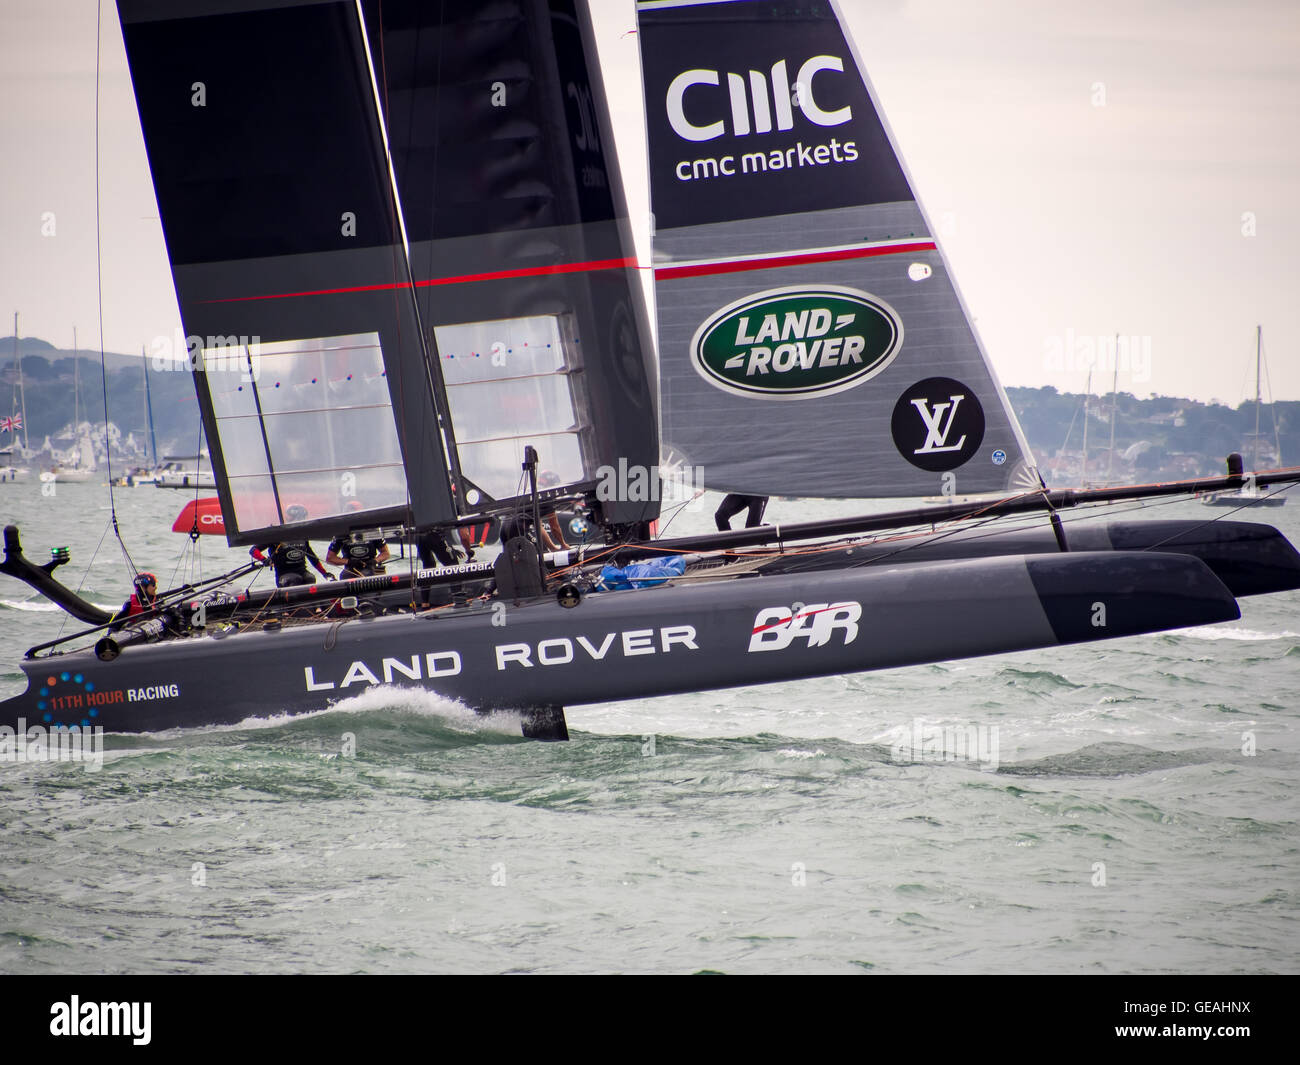 Portsmouth, UK, July 24 2016. Land Rover Ben Ainslie racing gather speed as they approach the finish line to win the first race during the second day of racing at the Americas cup World Series in Portsmouth. Credit:  simon evans/Alamy Live News Stock Photo